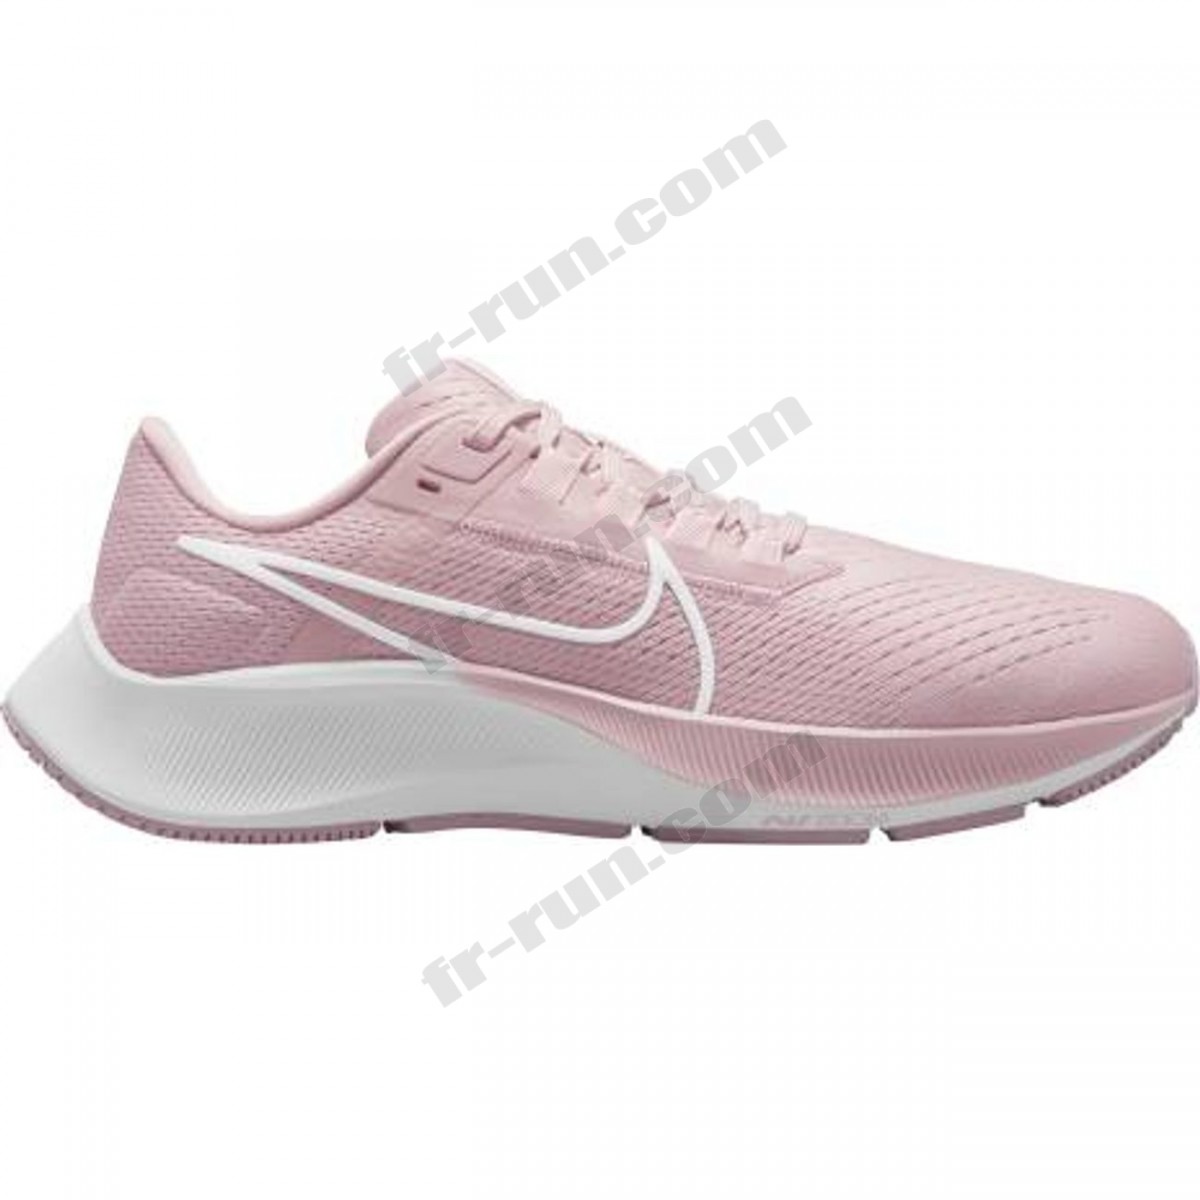 Nike/CHAUSSURES running femme NIKE WMNS NIKE AIR ZOOM PEGASUS 38 √ Nouveau style √ Soldes - Nike/CHAUSSURES running femme NIKE WMNS NIKE AIR ZOOM PEGASUS 38 √ Nouveau style √ Soldes